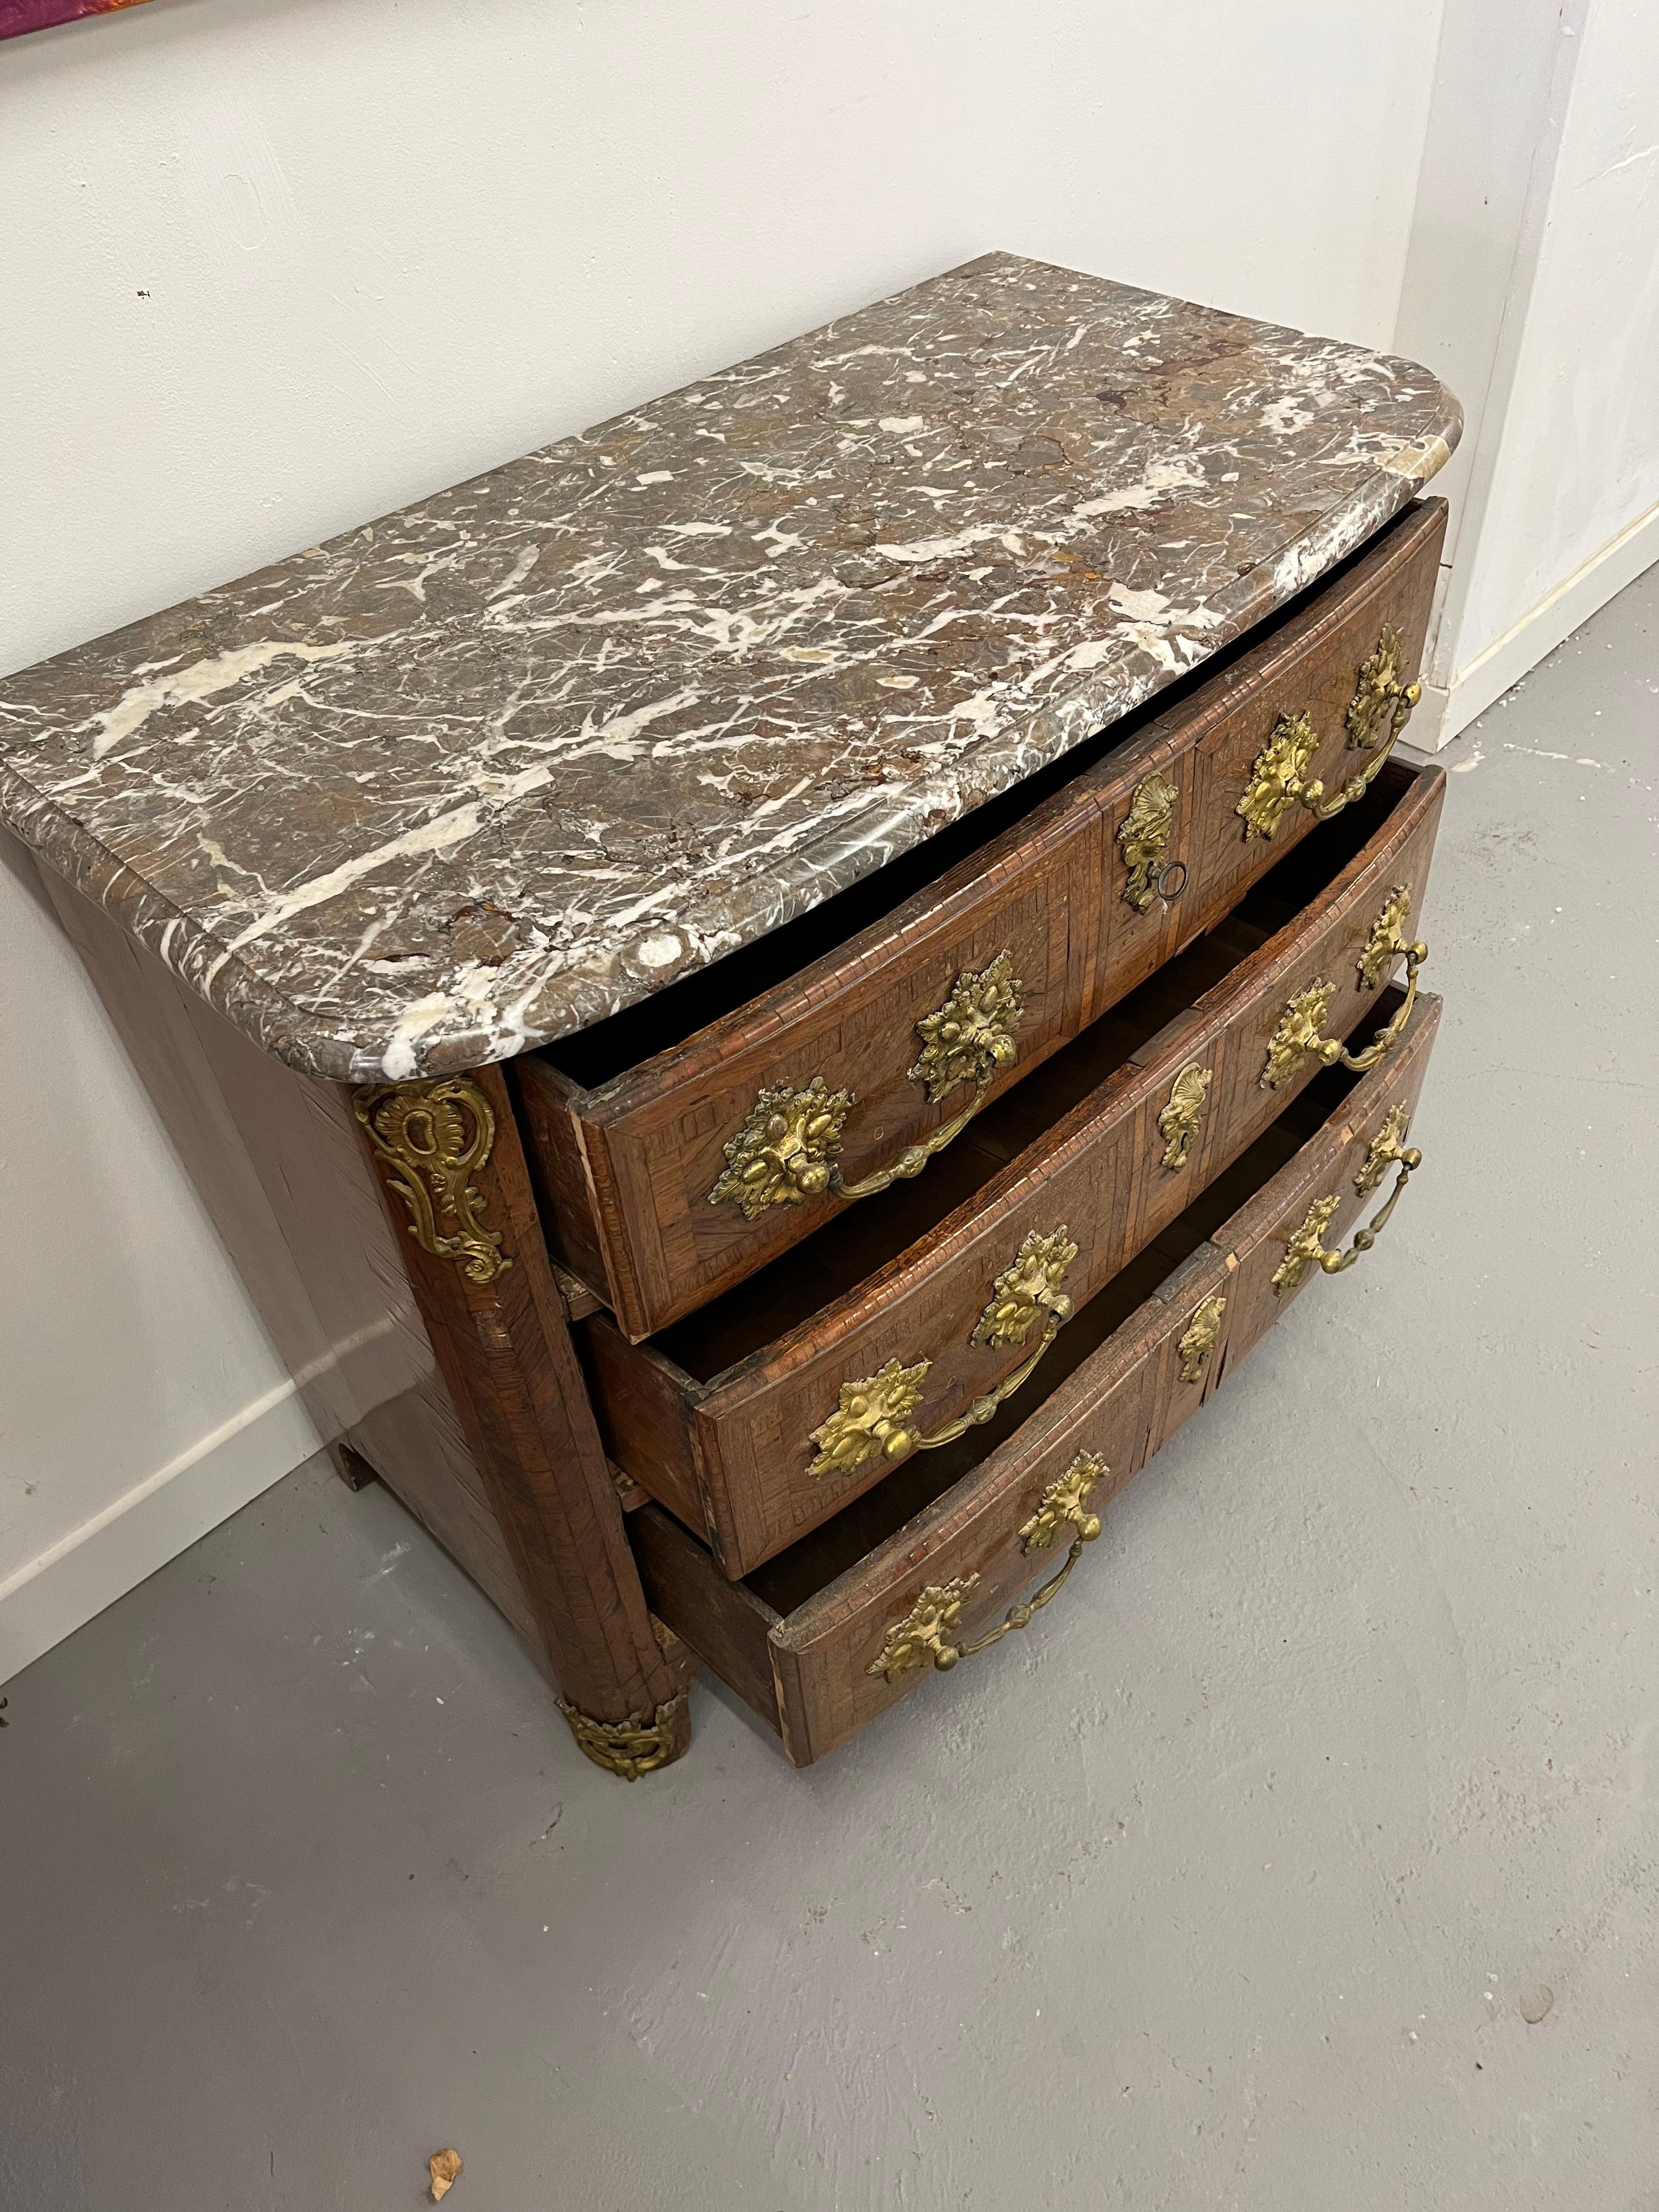 Exquisite small commode, beautifull LXIV original hardwares, excellent proportions.
Condition as is, needs few small restaurations in the veneer.
 